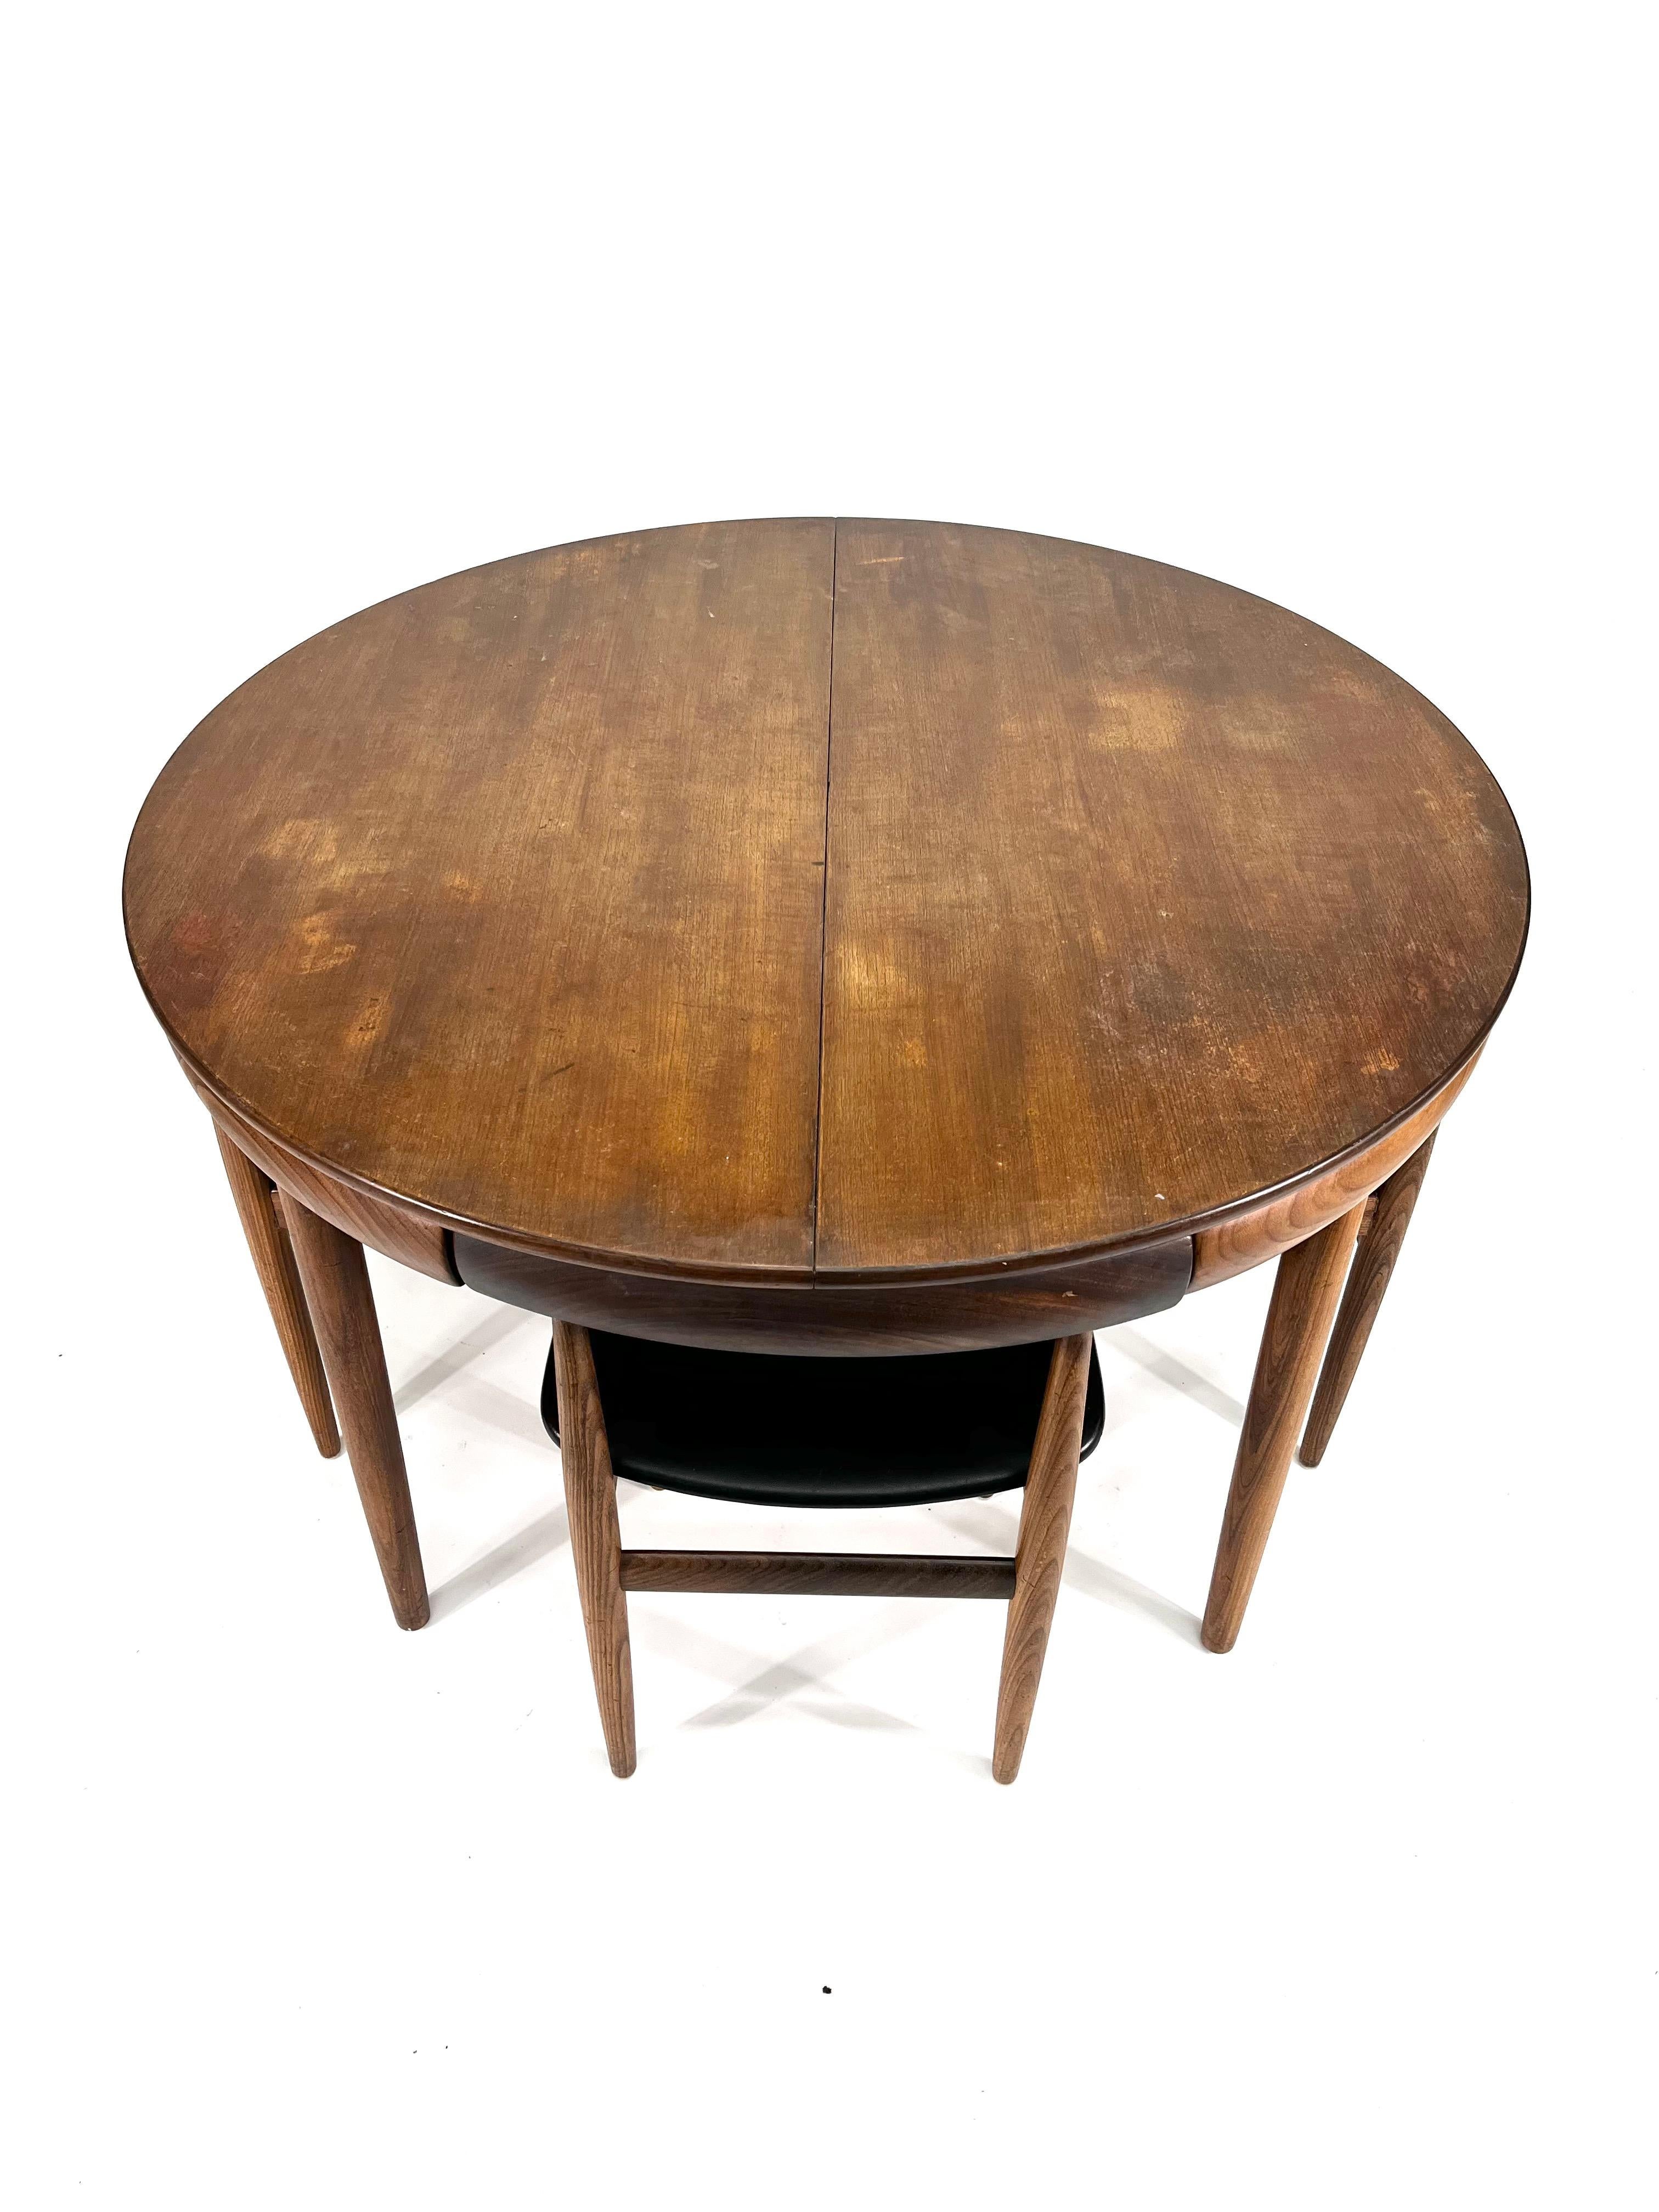 Has not yet been restored but will be back to excellent condition with new upholstery. 

Designed by Hans Olsen, this 1960s dining table and chairs set is a fantastic example of mid century Danish design. Comprising of a ‘roundette’ table and 4